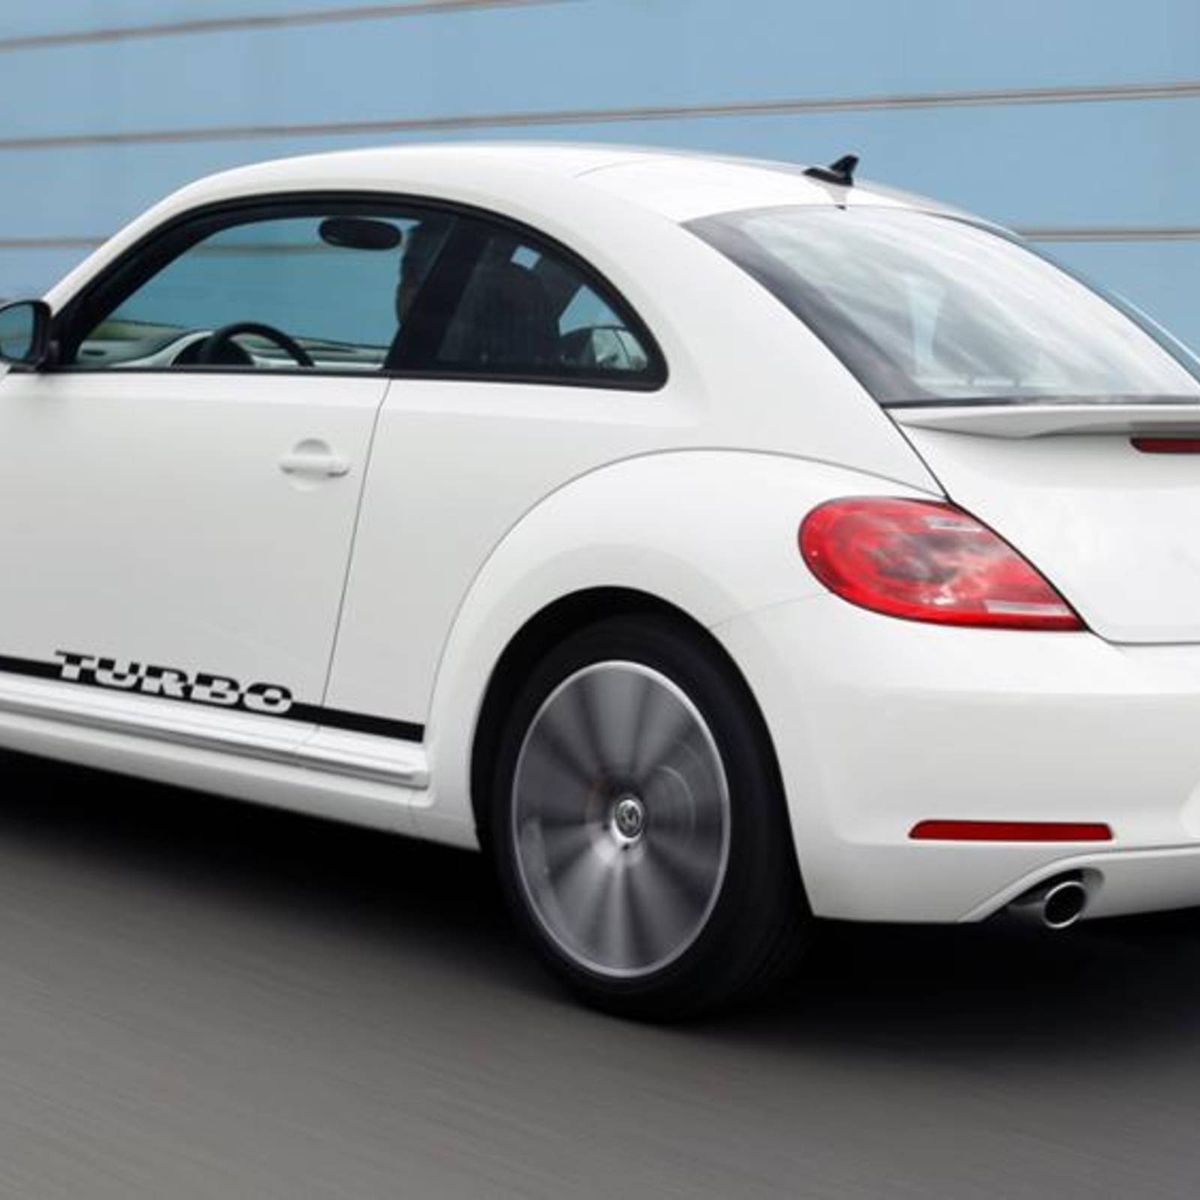 2012 Volkswagen Beetle Turbo: Review notes: A potent and manly bug